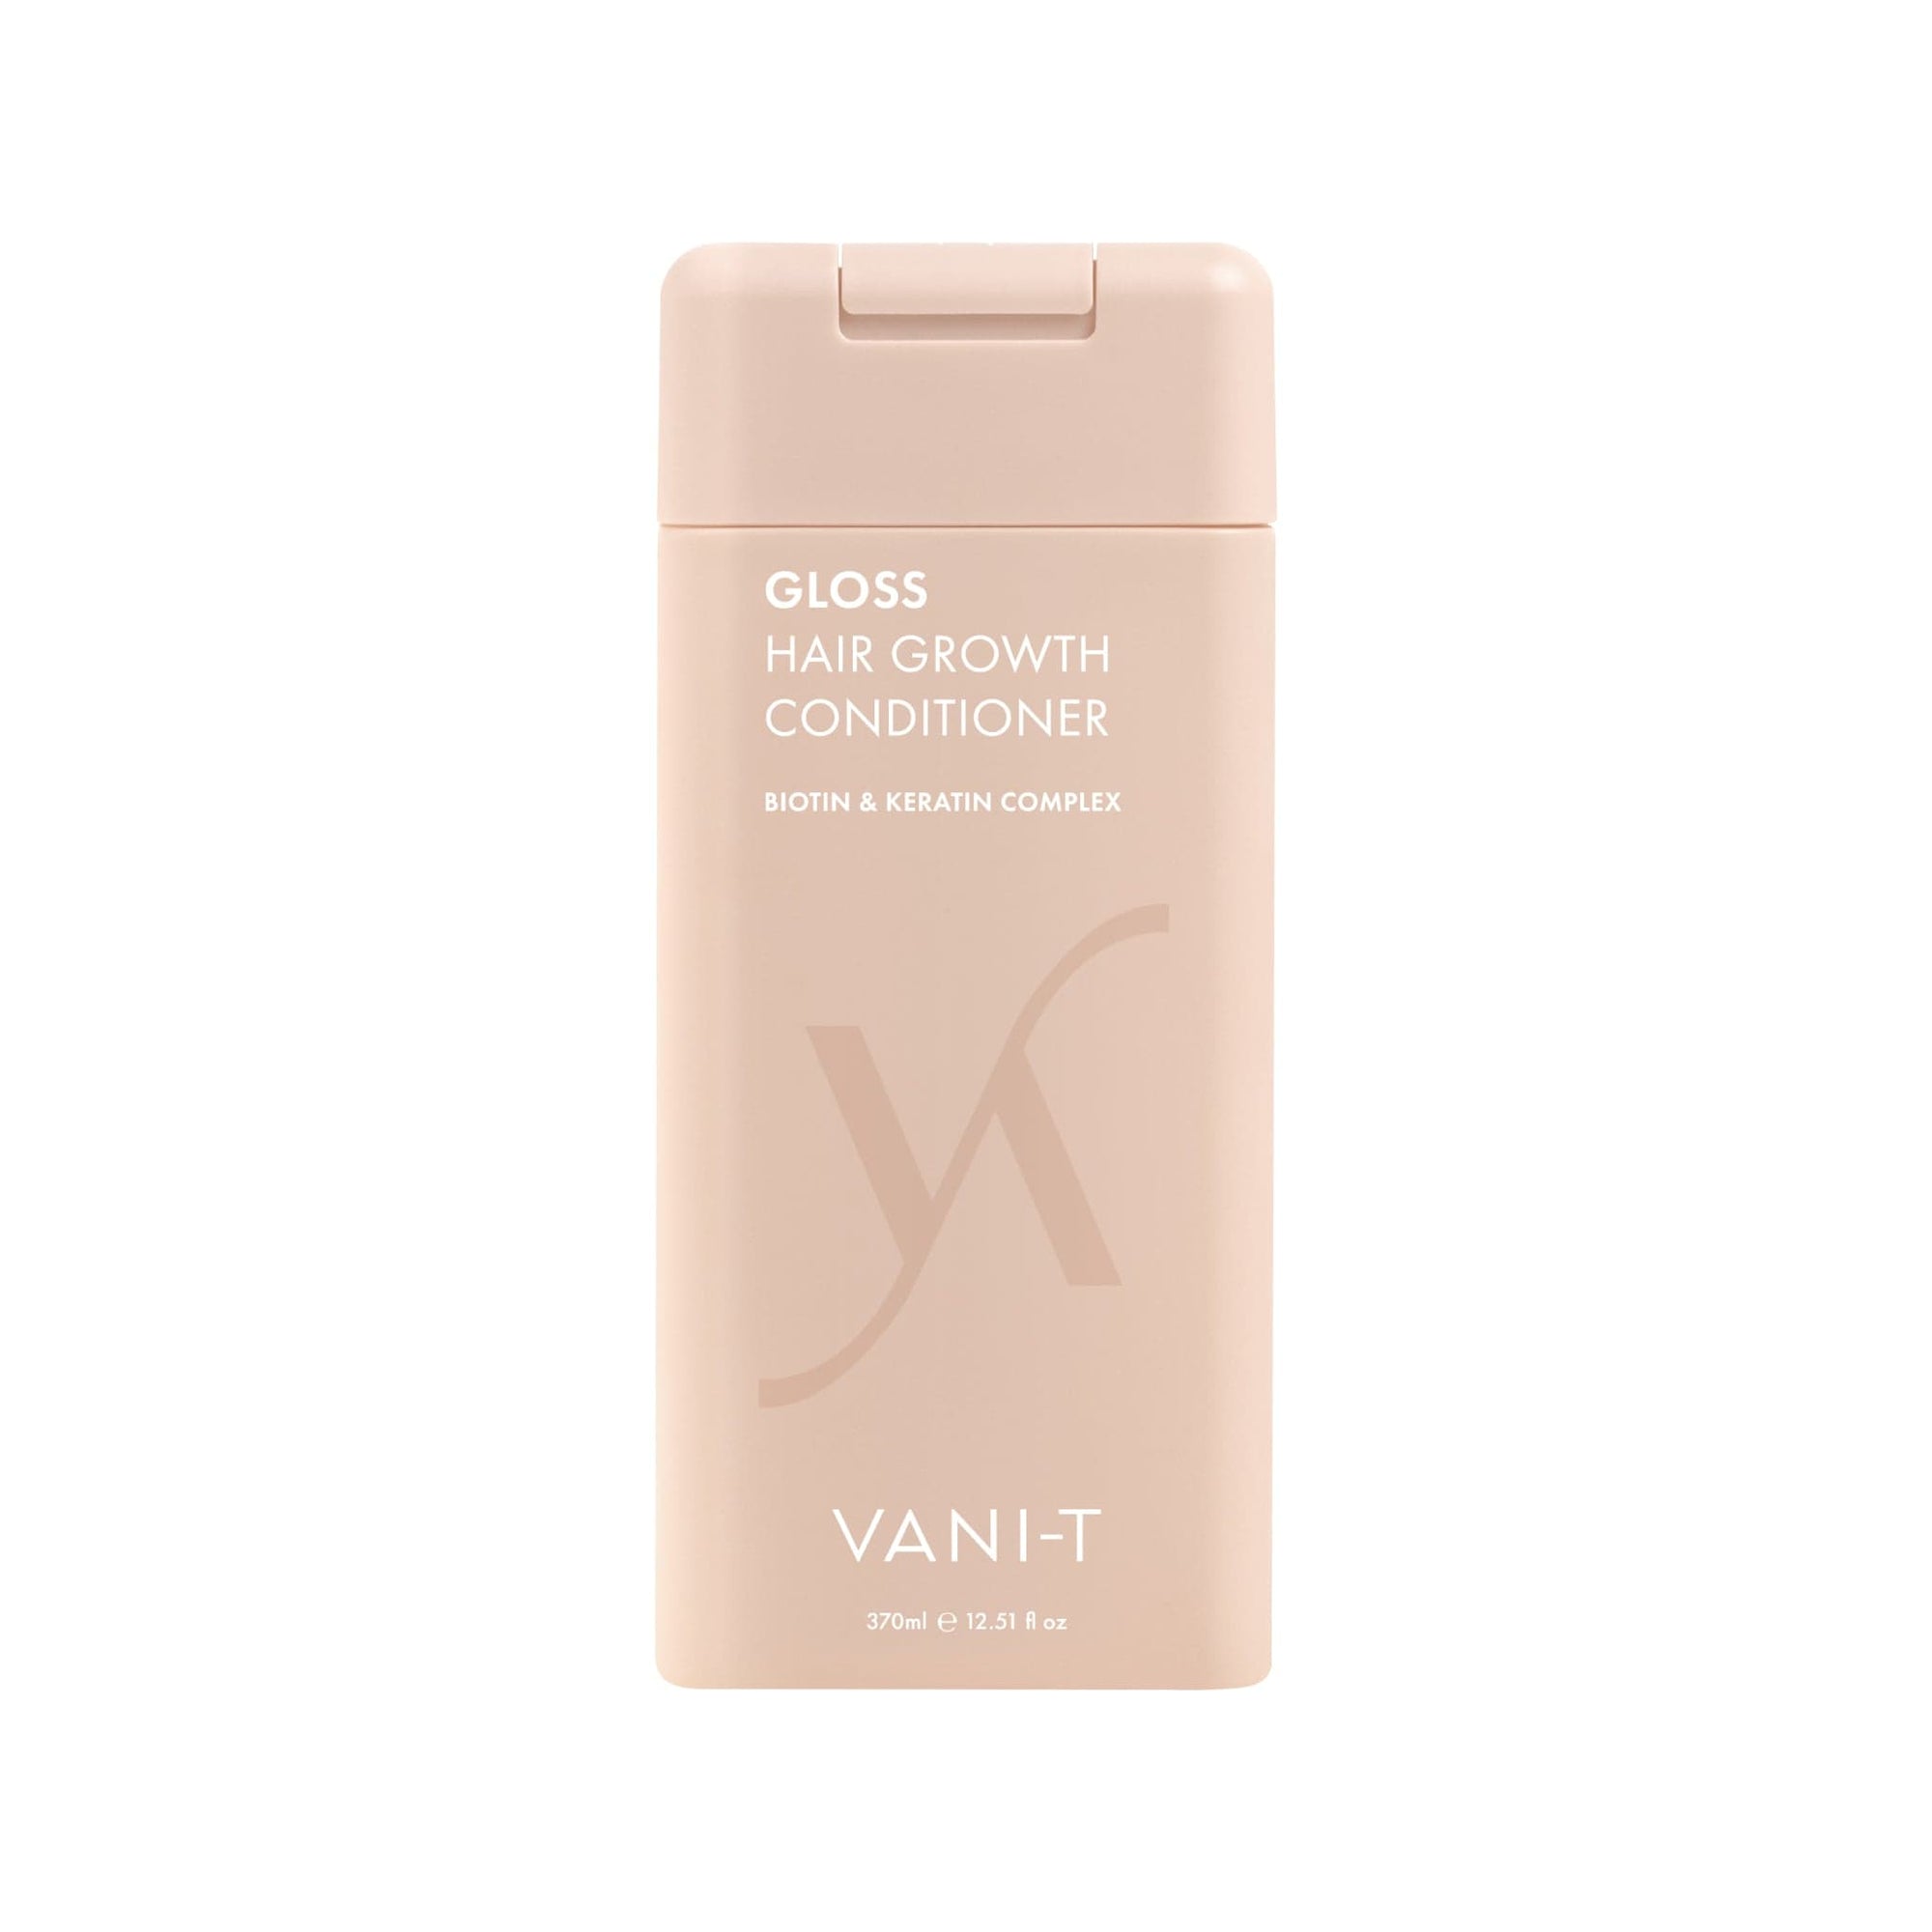 Vani-T Gloss Hair Growth Conditioner - 370ml 2055 conditioner - Vani-T - Luxe Pacifique